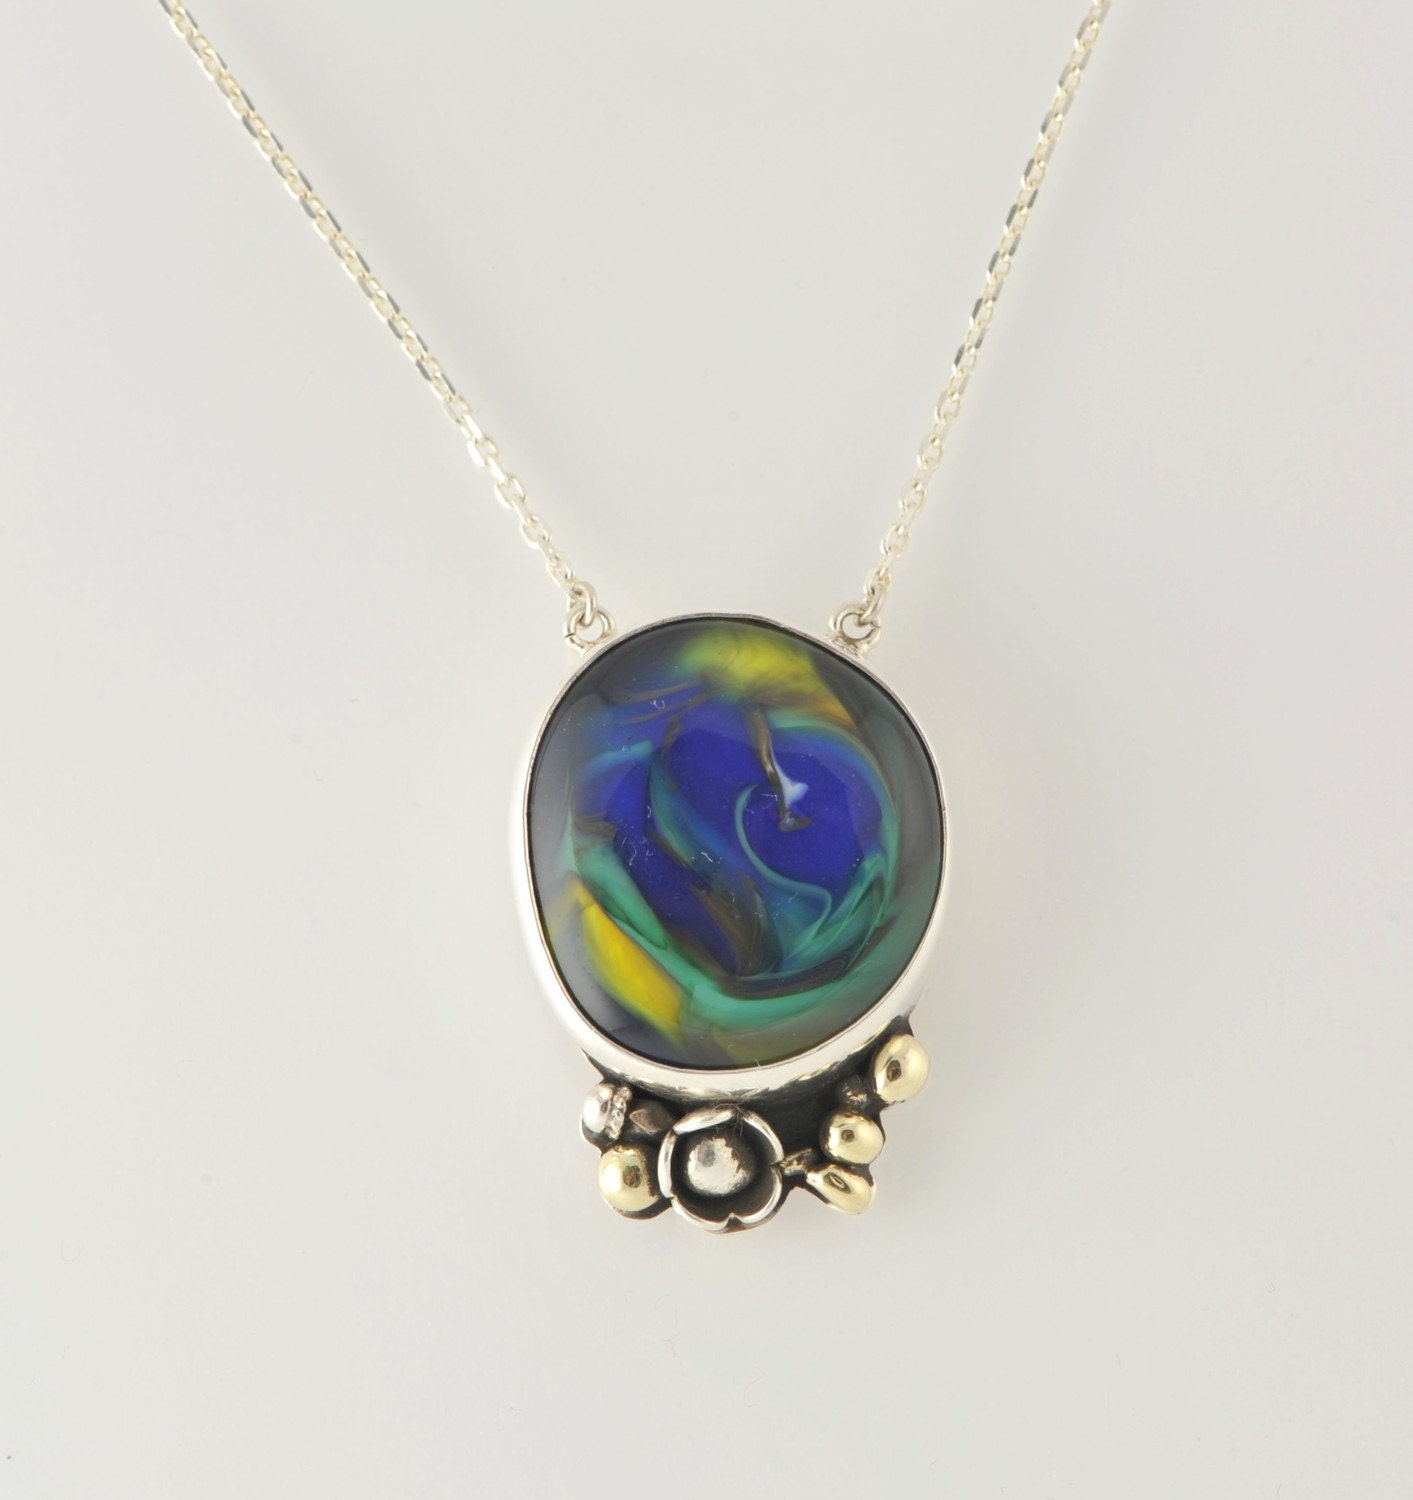 Cobalt Blue Yellow Green colors of Lampwork Glass Silver Necklace with Chain